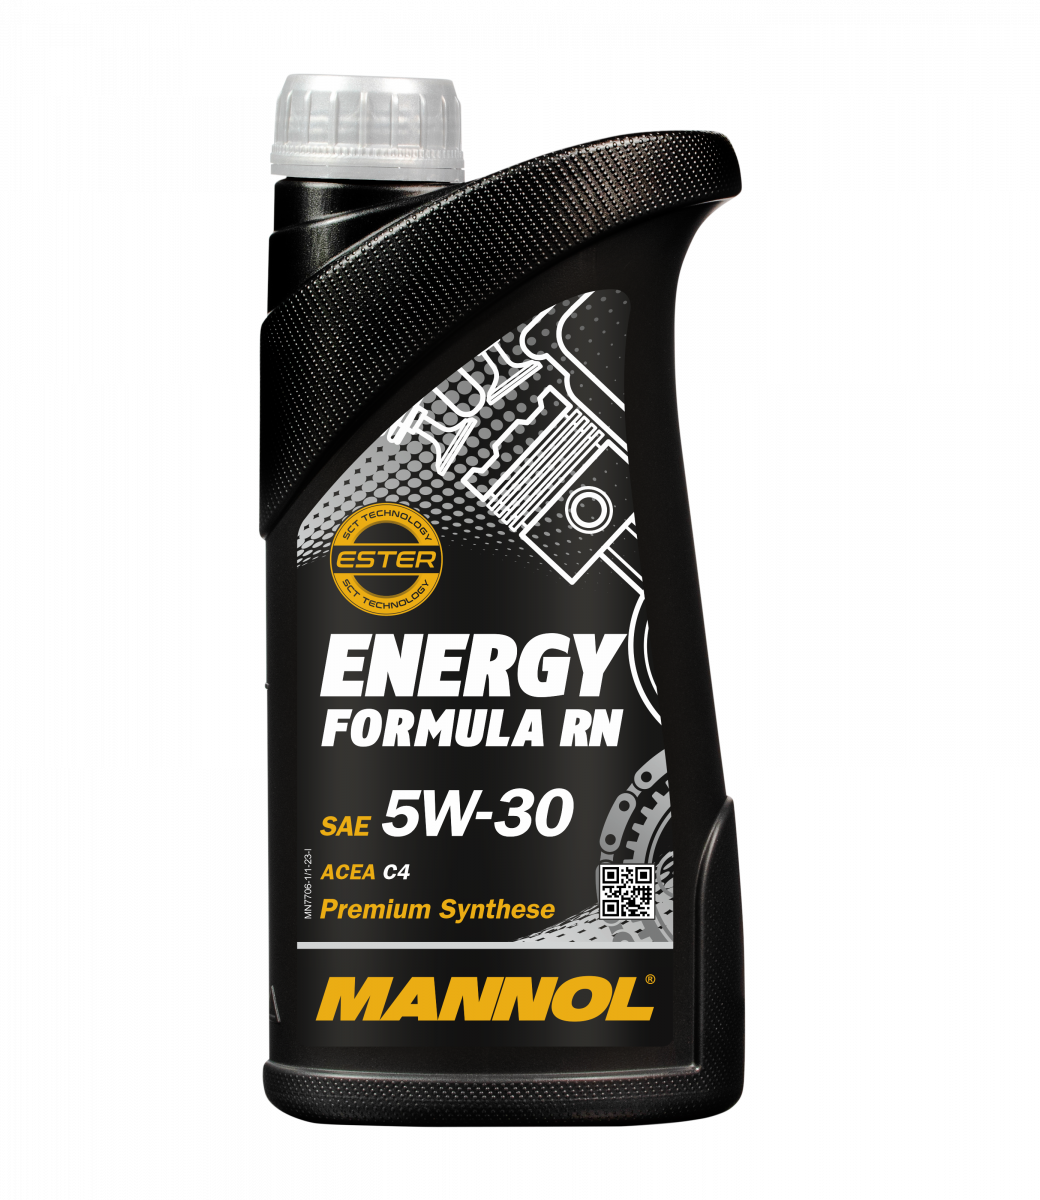 Aceite Mannol Energy 5w30 6lts Sintetico Made In Germany